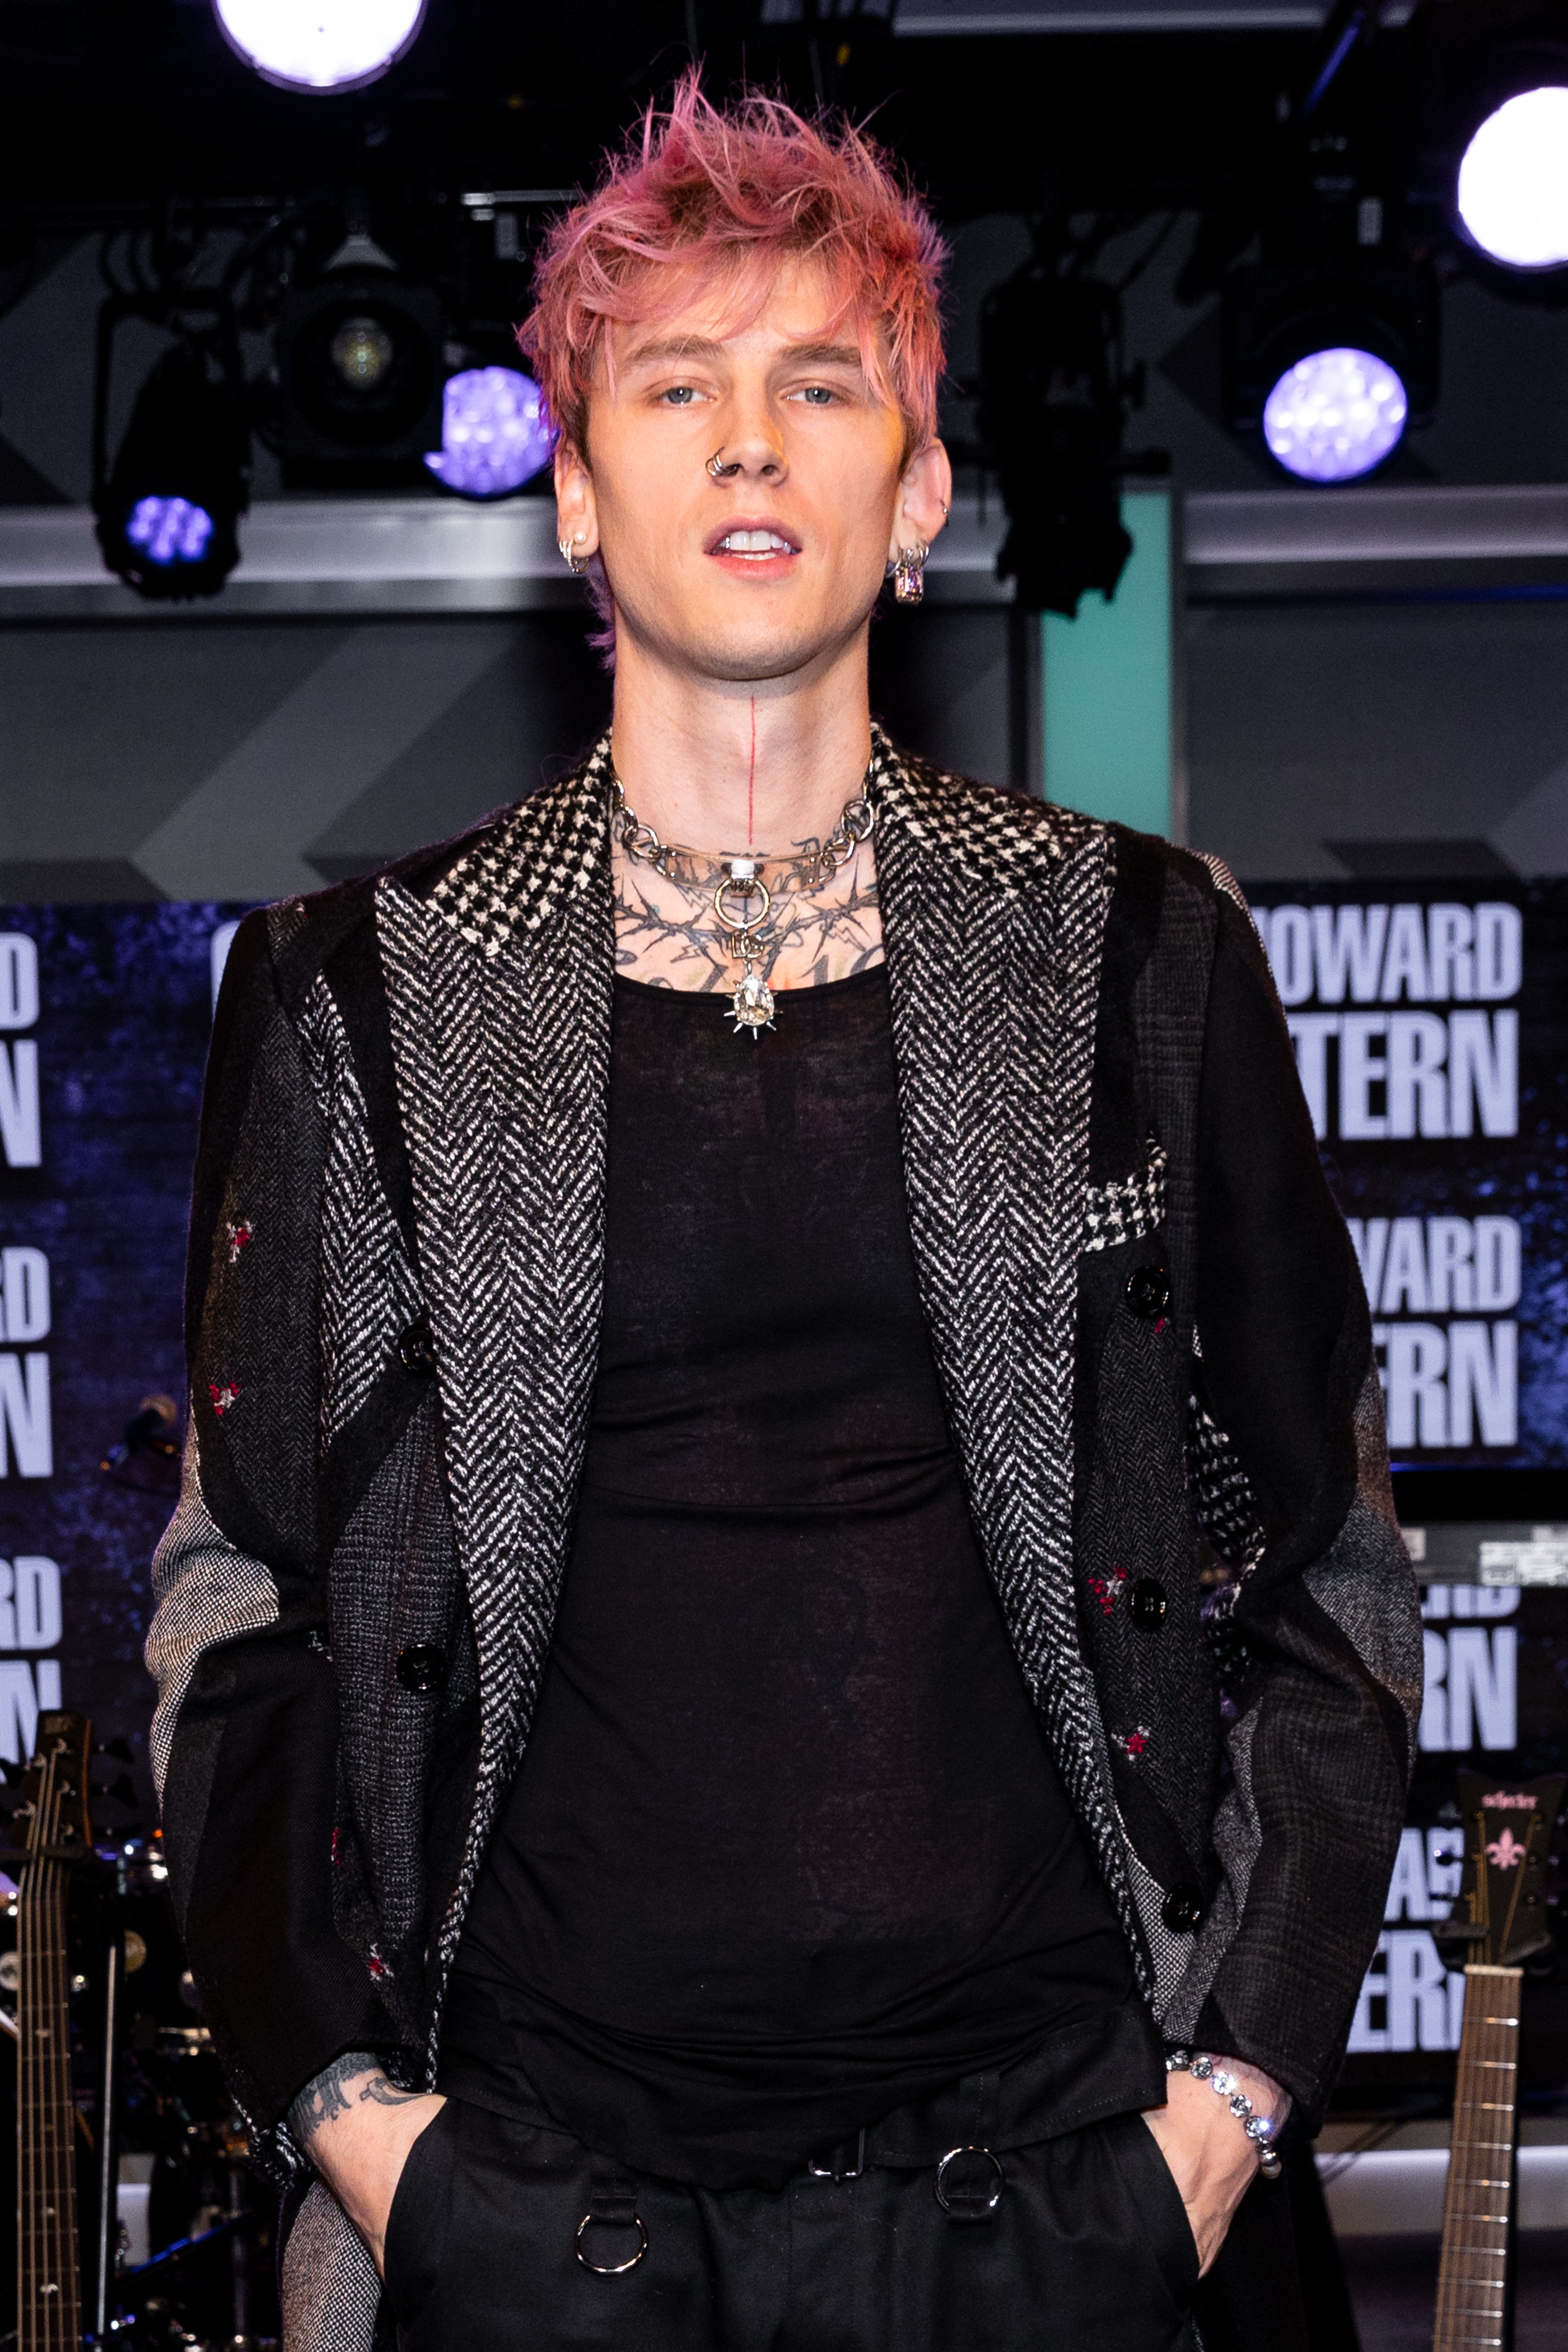 MGK with pink hair, wearing a studded jacket and necklace, standing before a microphone stand